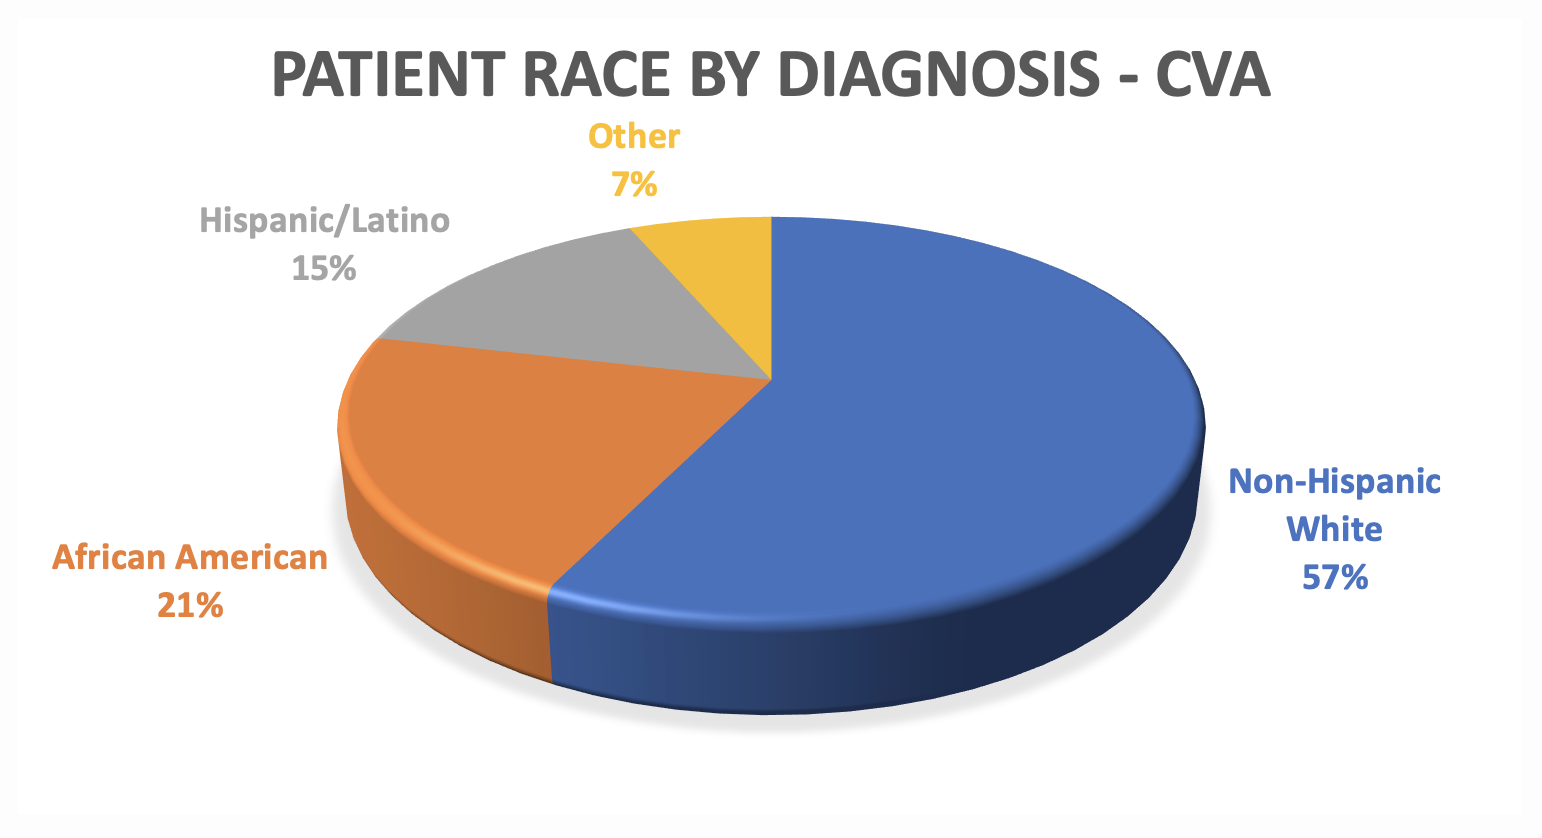 image of pie chart reveals patient race data for CVA at Pate Rehab